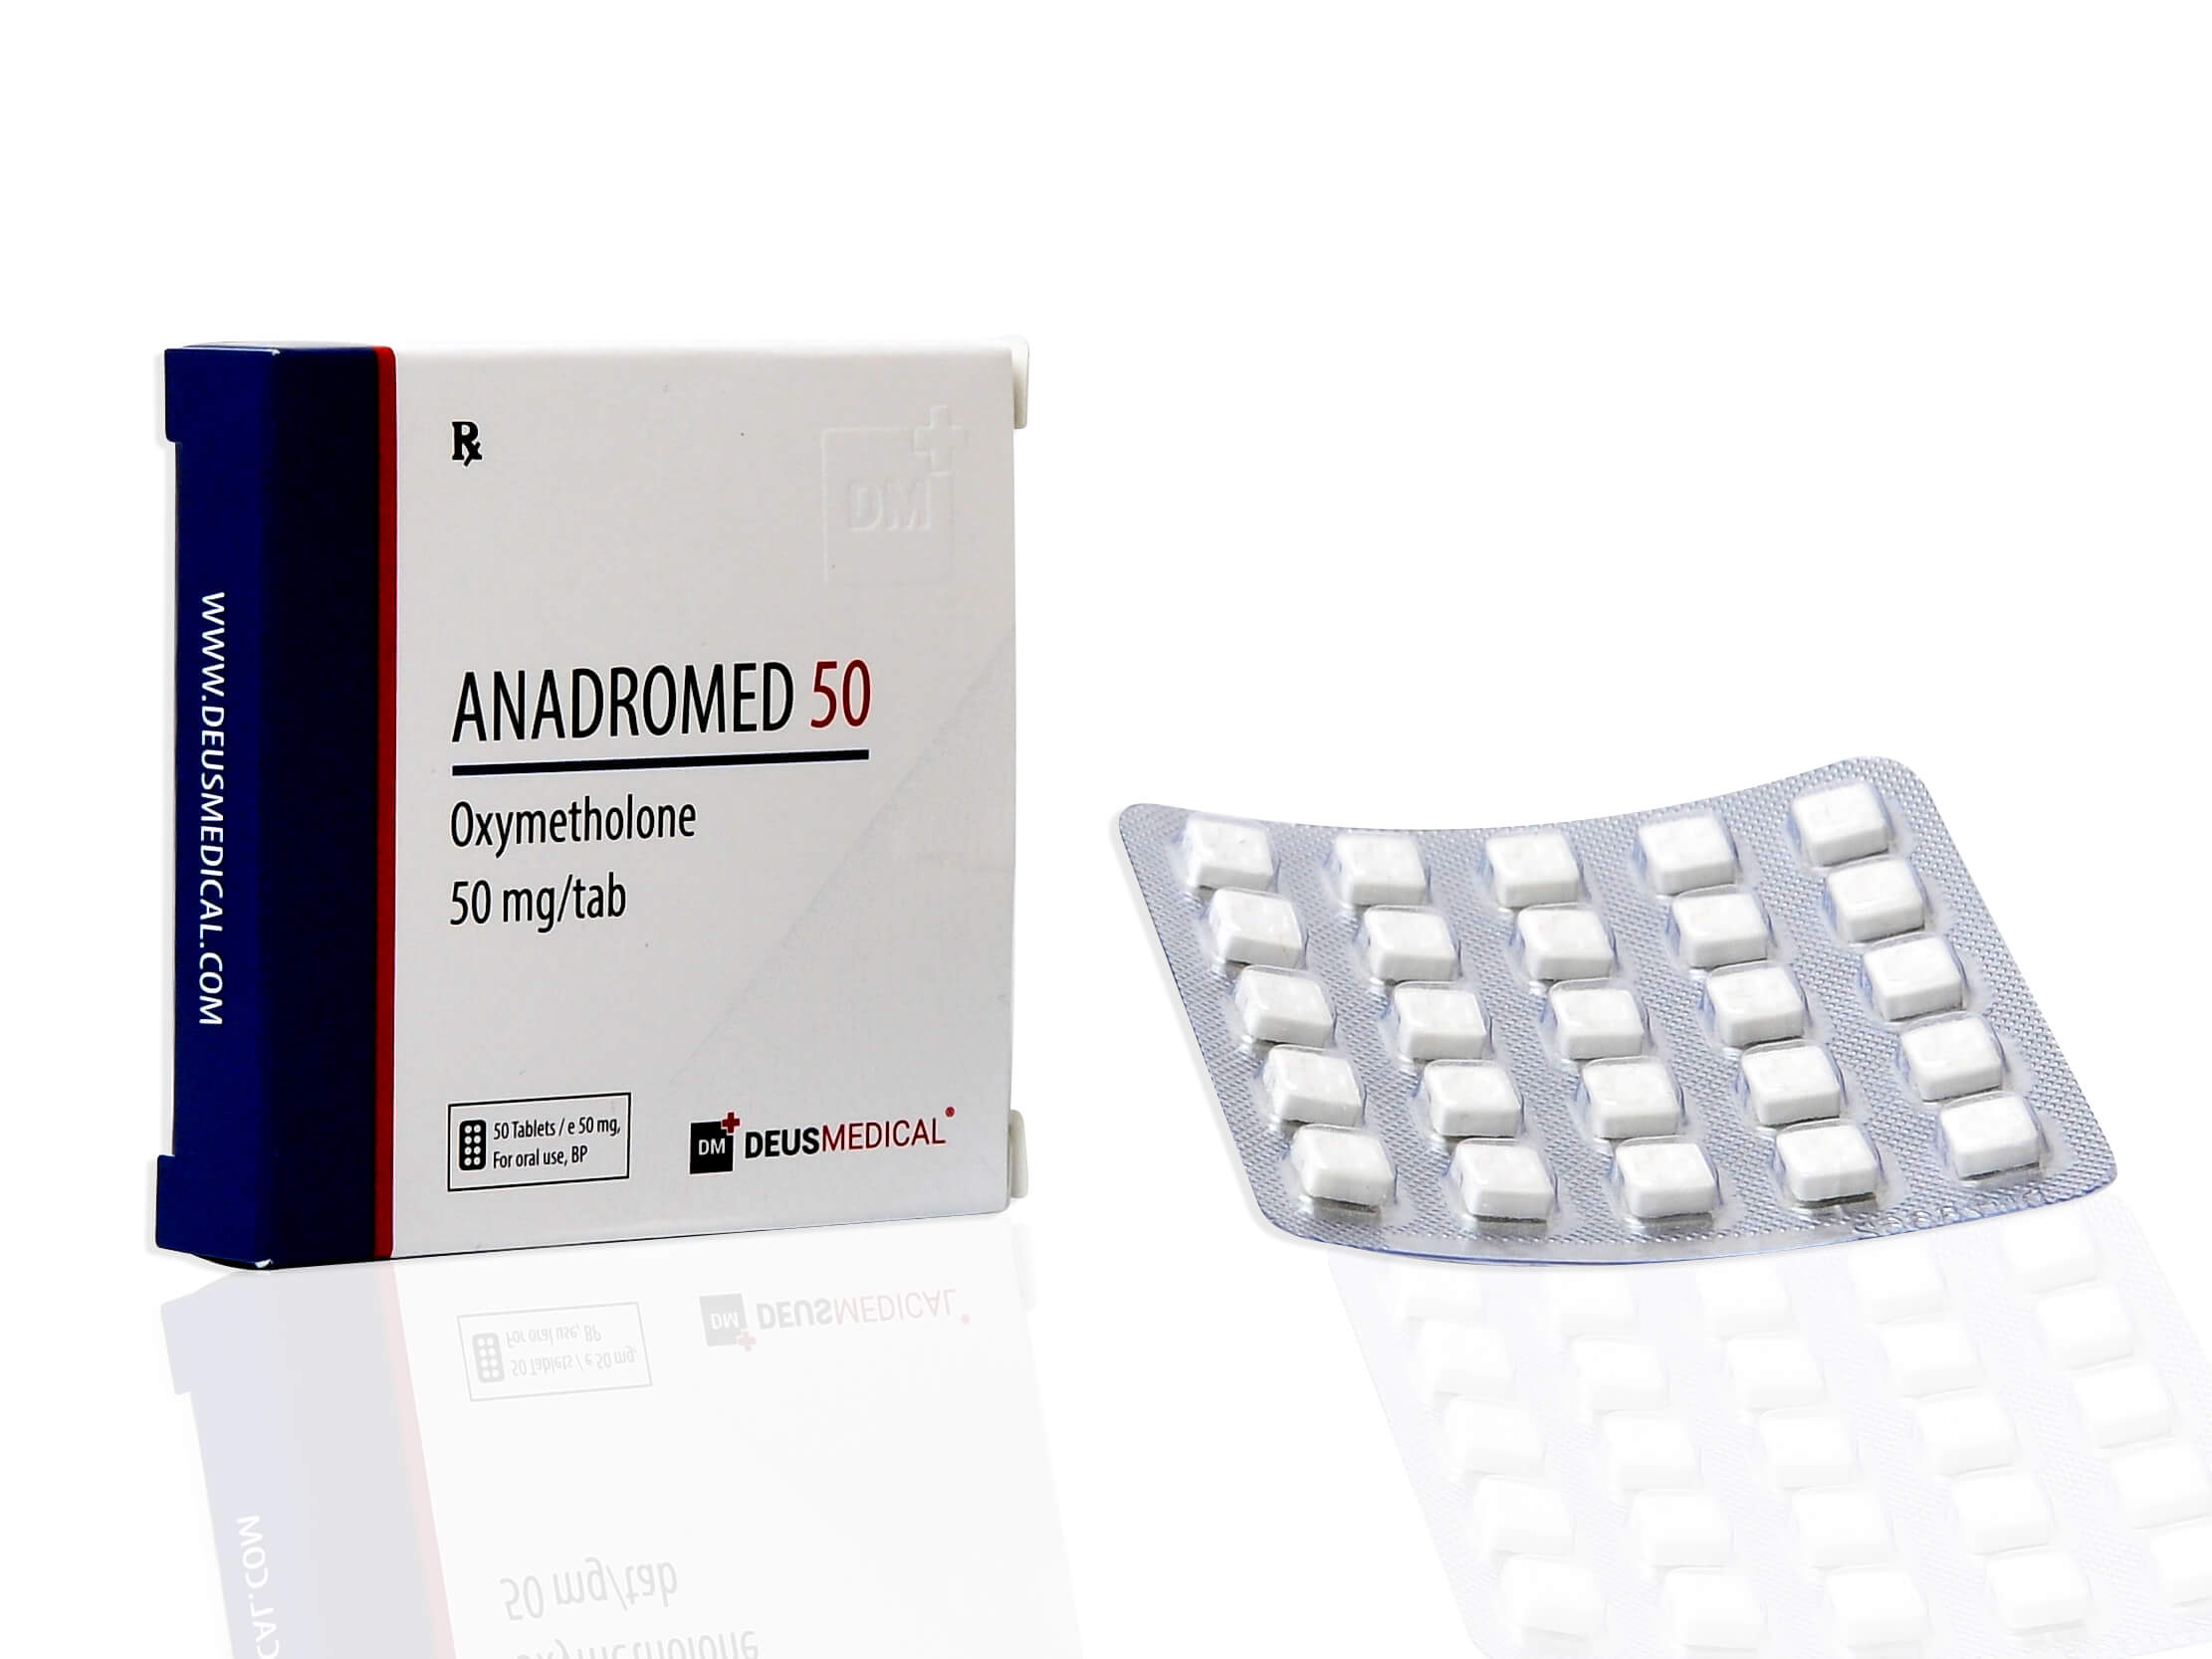 ANADROMED 50 (Oxymetholone) - 50tabs of 50mg - DEUS-MEDICAL - LeCoq.to